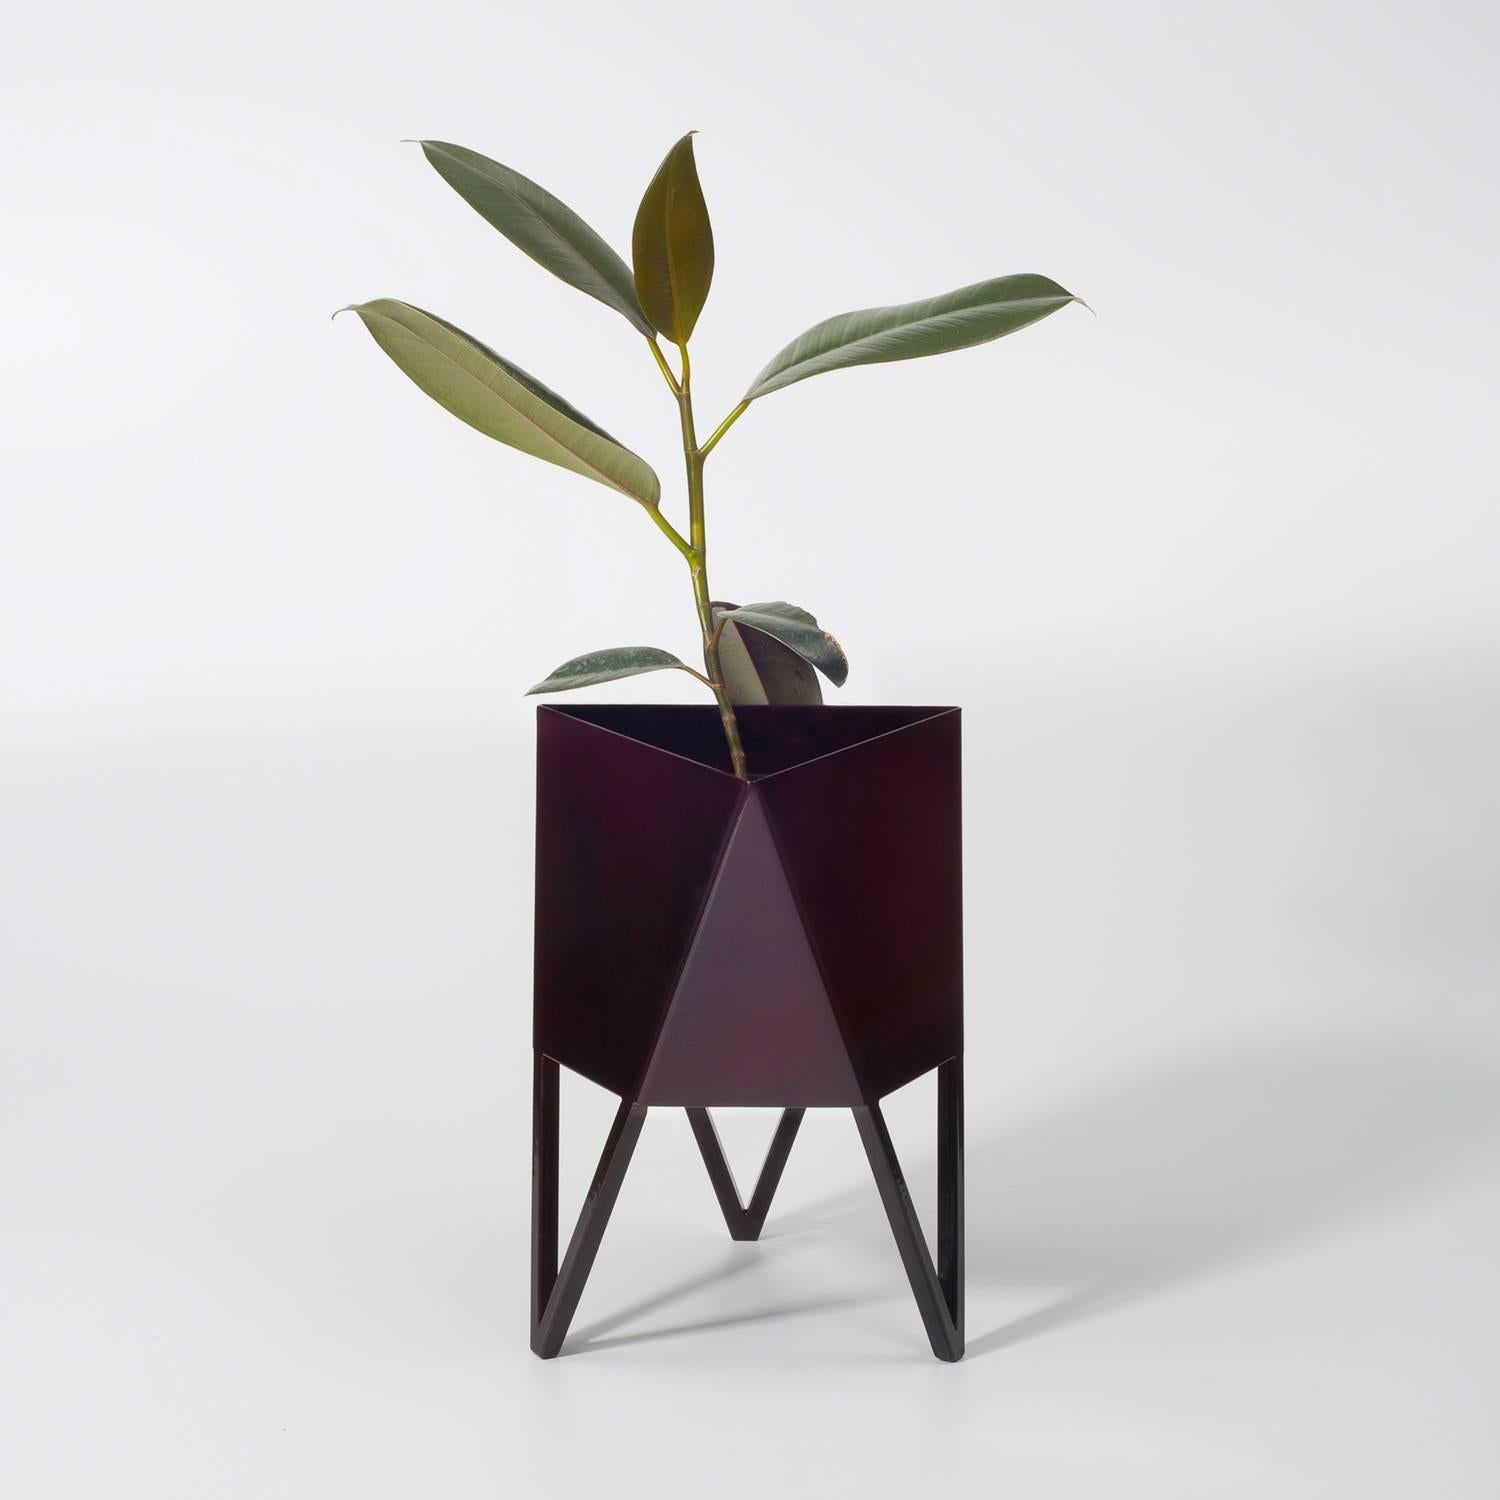 Deca Planter in Living Coral Steel, Small, by Force/Collide 1